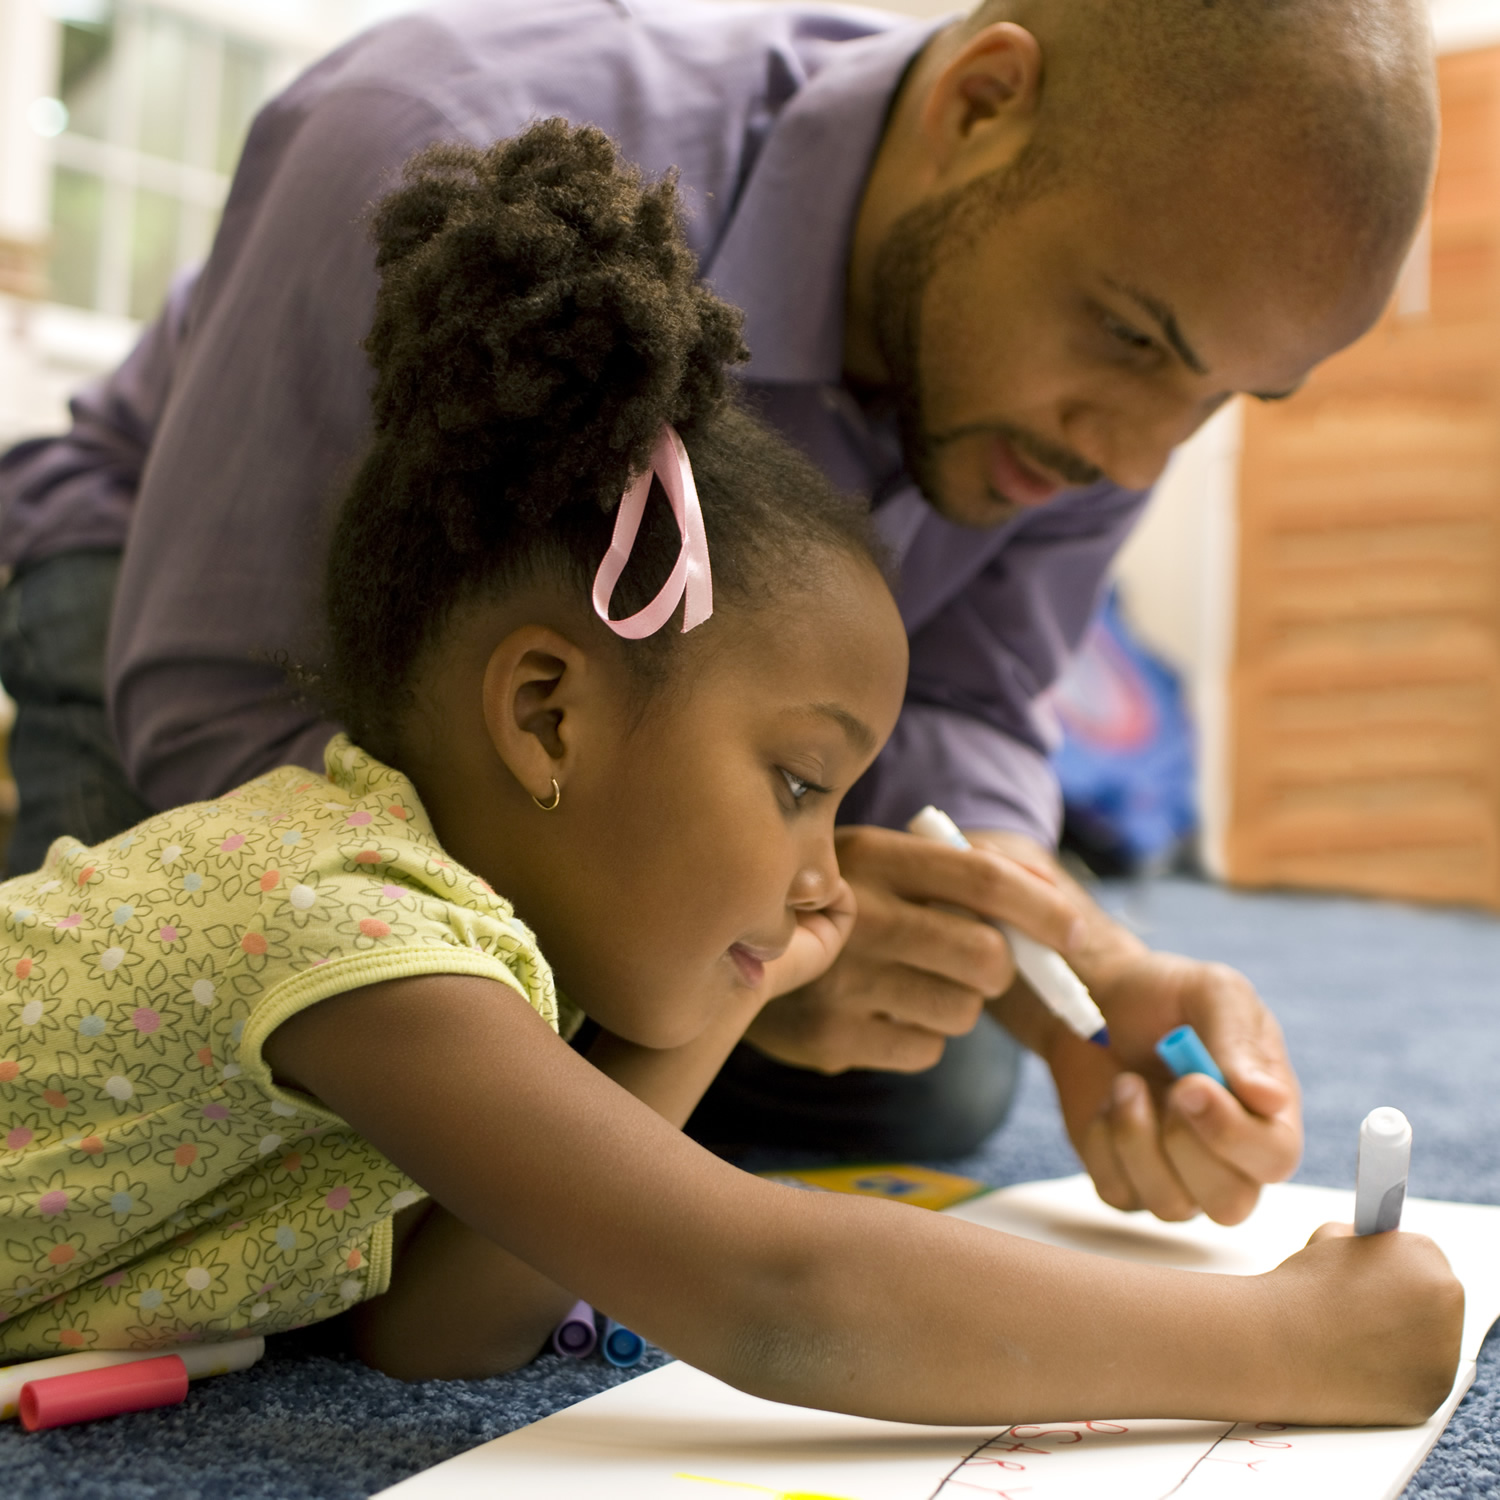 Games and activities to teach beginning writing skills to two-year-olds.